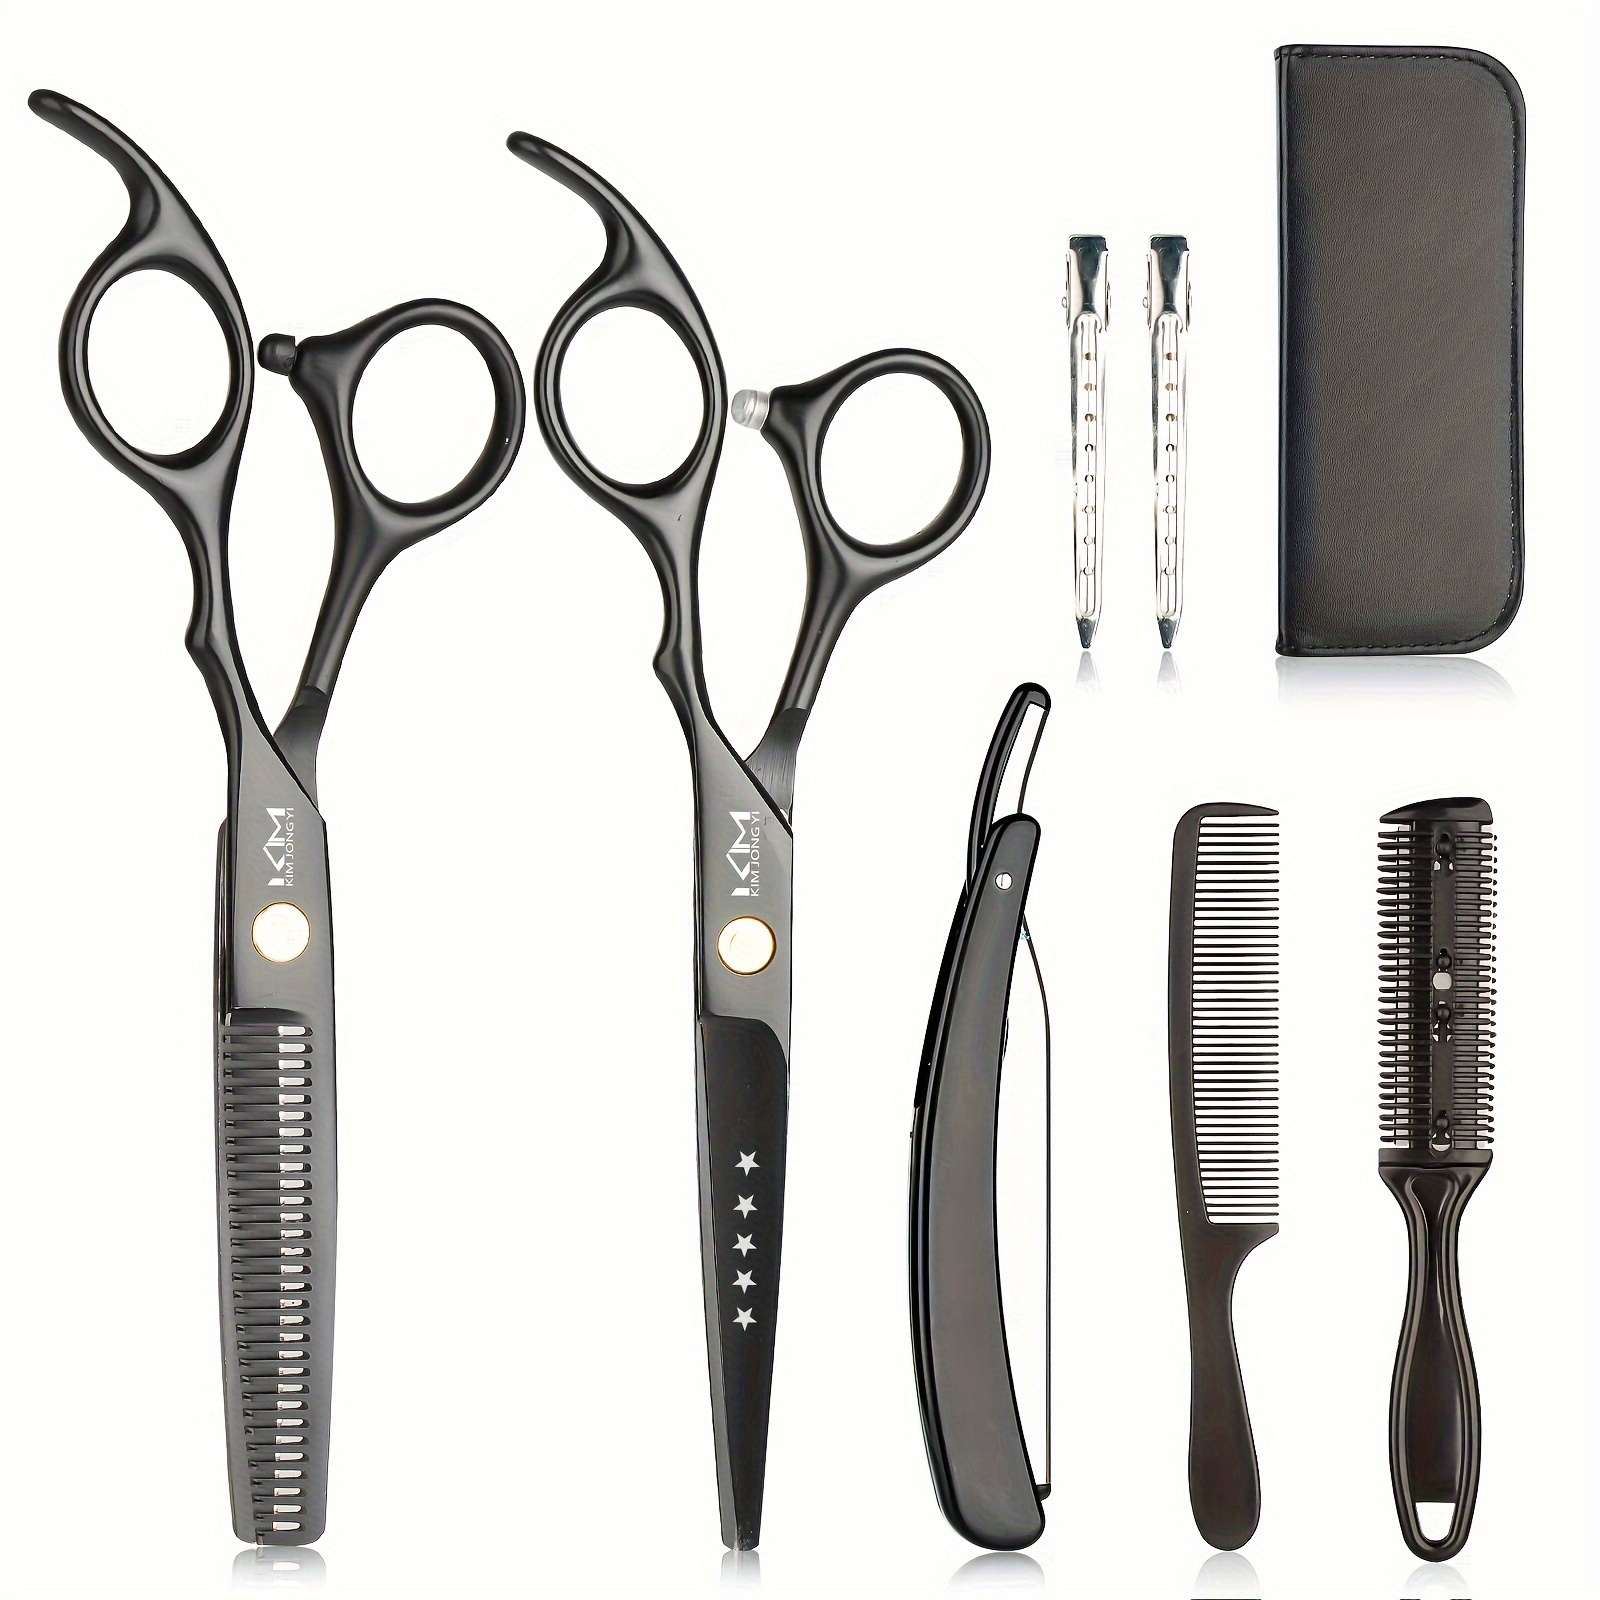 

Kim 8-piece Professional Haircutting Kit - 6.5" Titanium Coated Clippers, Shaver & Styling Tools For Men And Women - Black & Rose Hue Barber Accessories